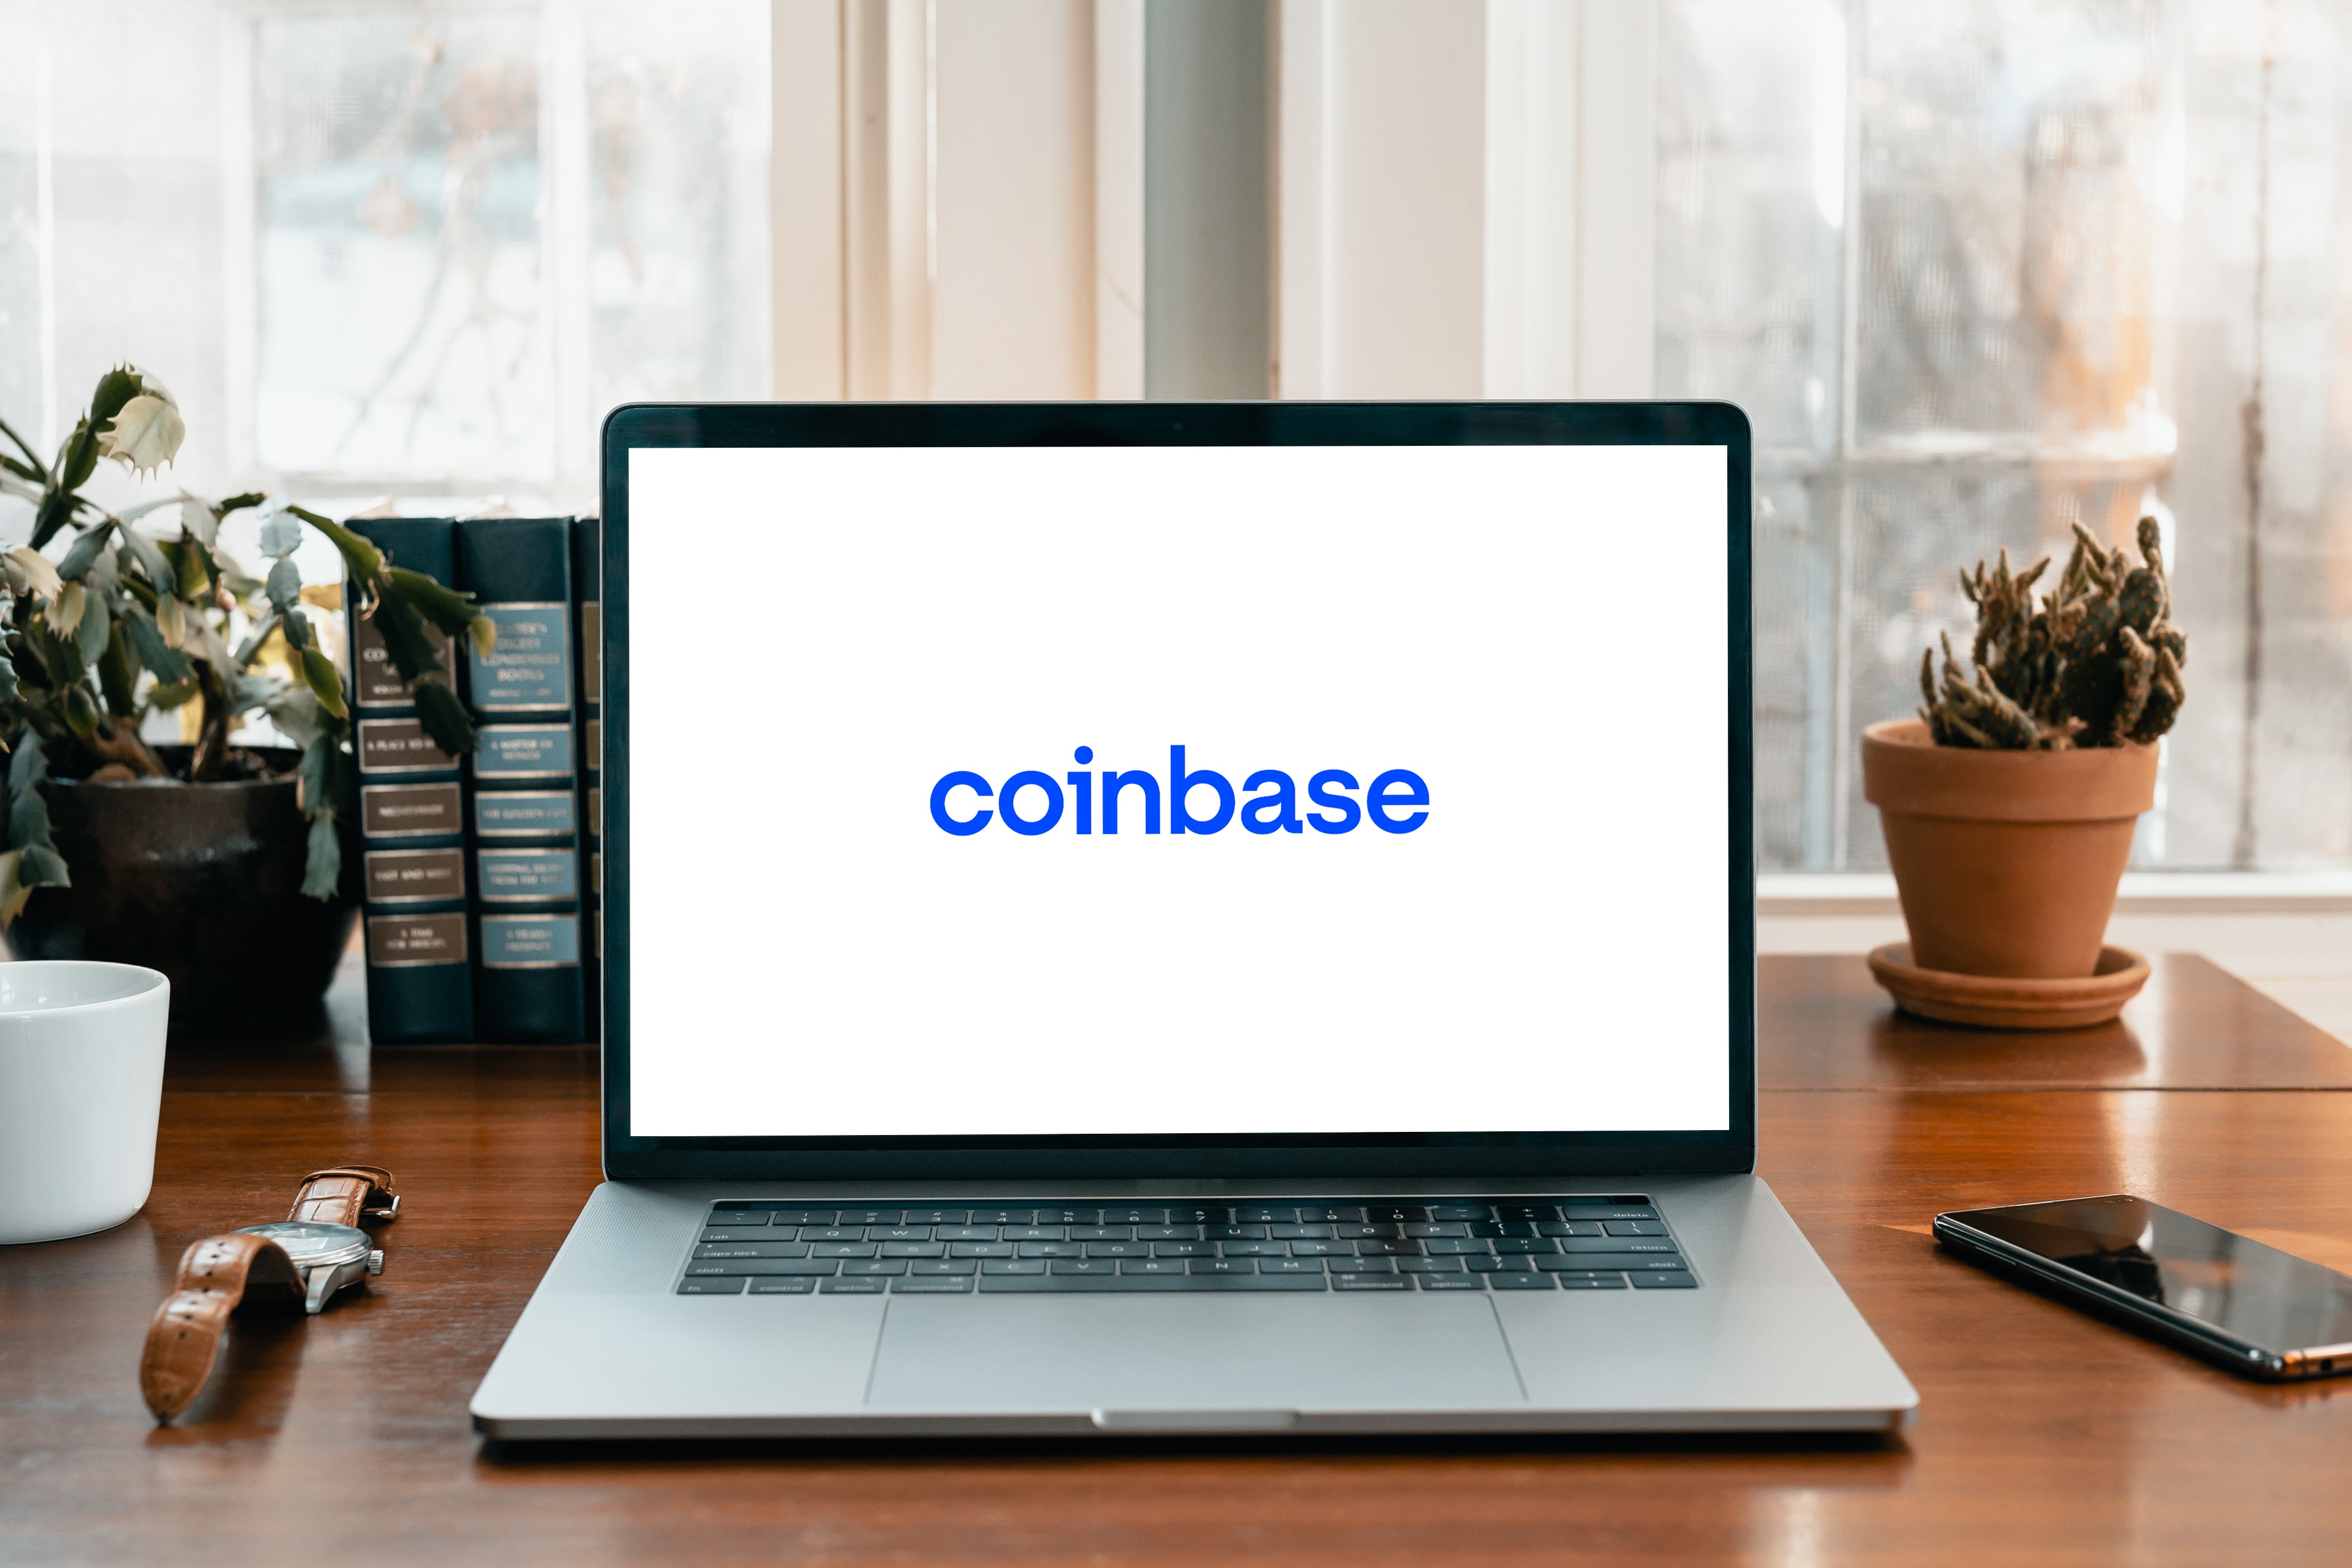 Coinbase Expands To Africa, This Partnership Will Make It Happen